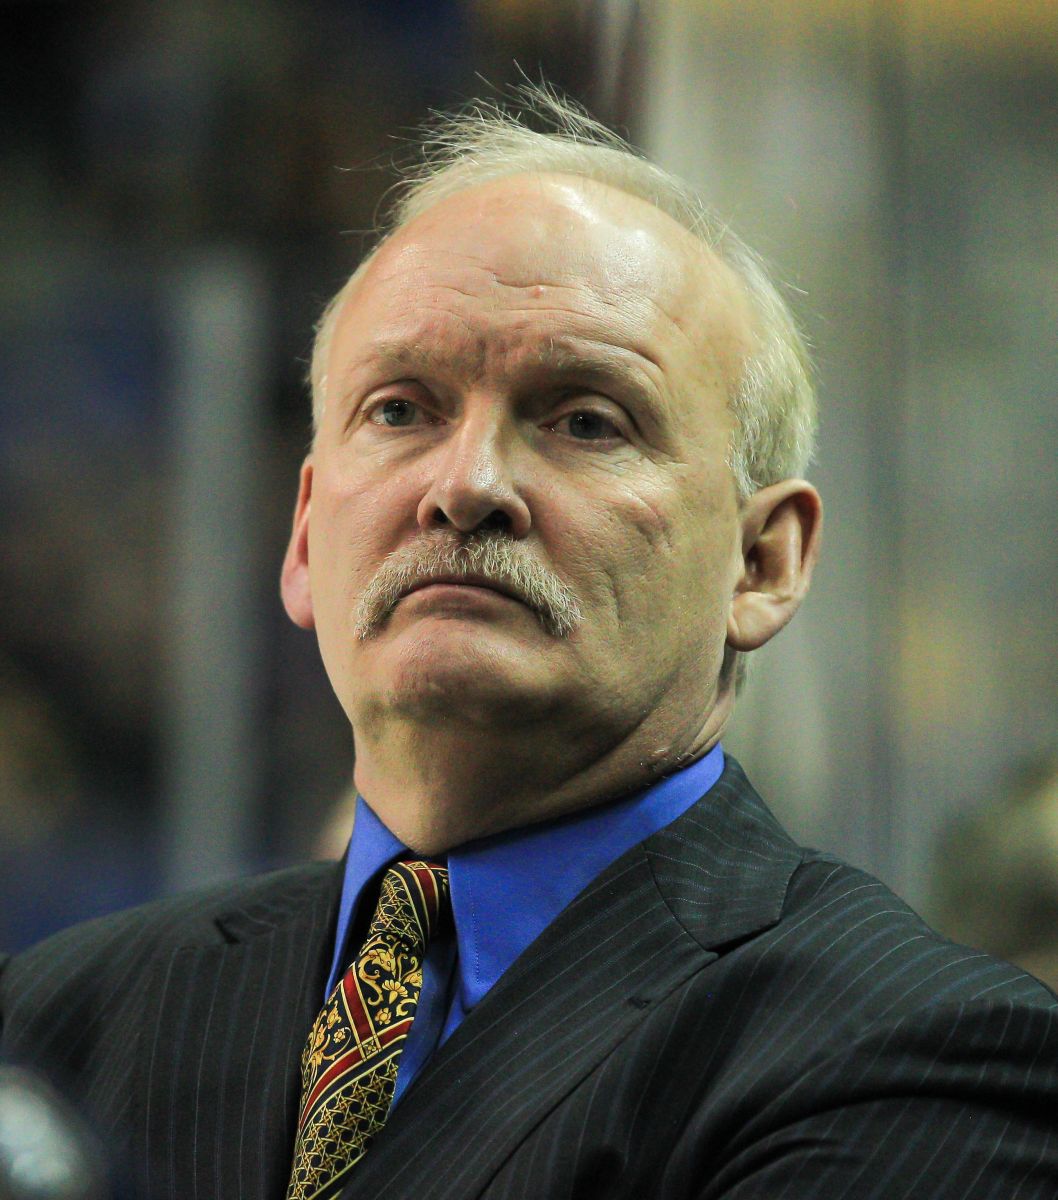 Devils coach Lindy Ruff has been given a multi-year contact